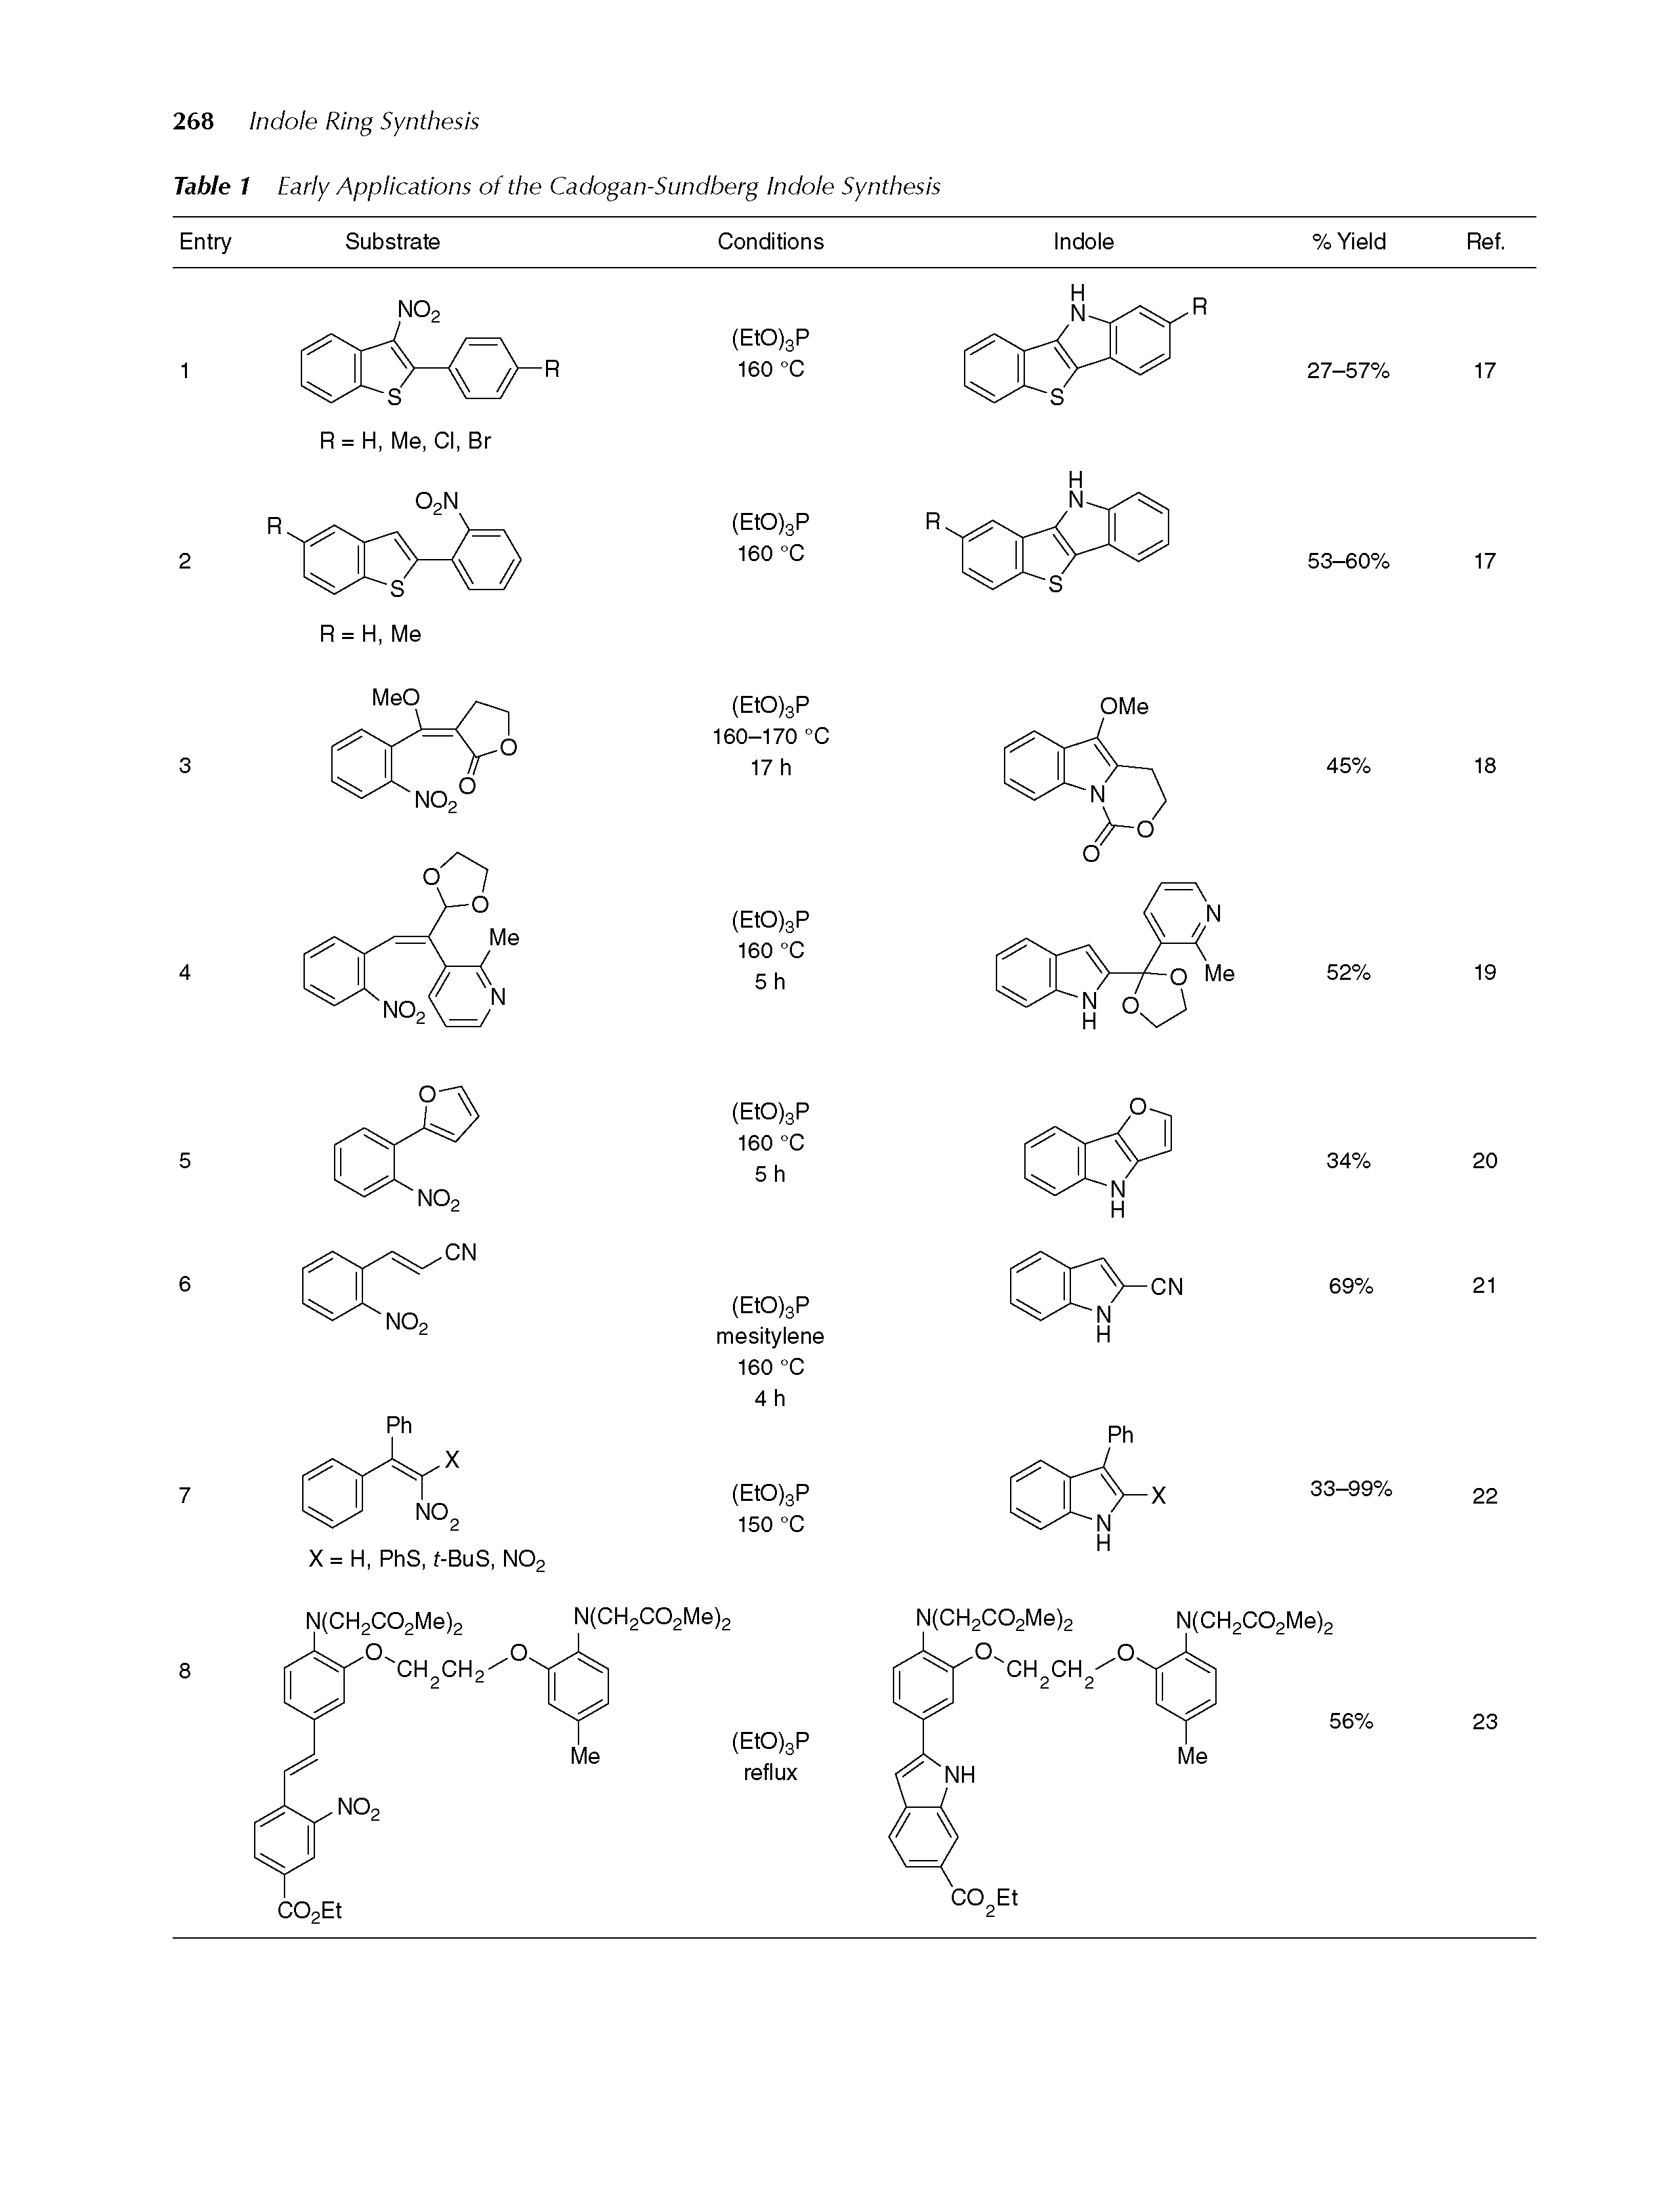 Table 1 Early Applications of the Cadogan-Sundberg Indole Synthesis...